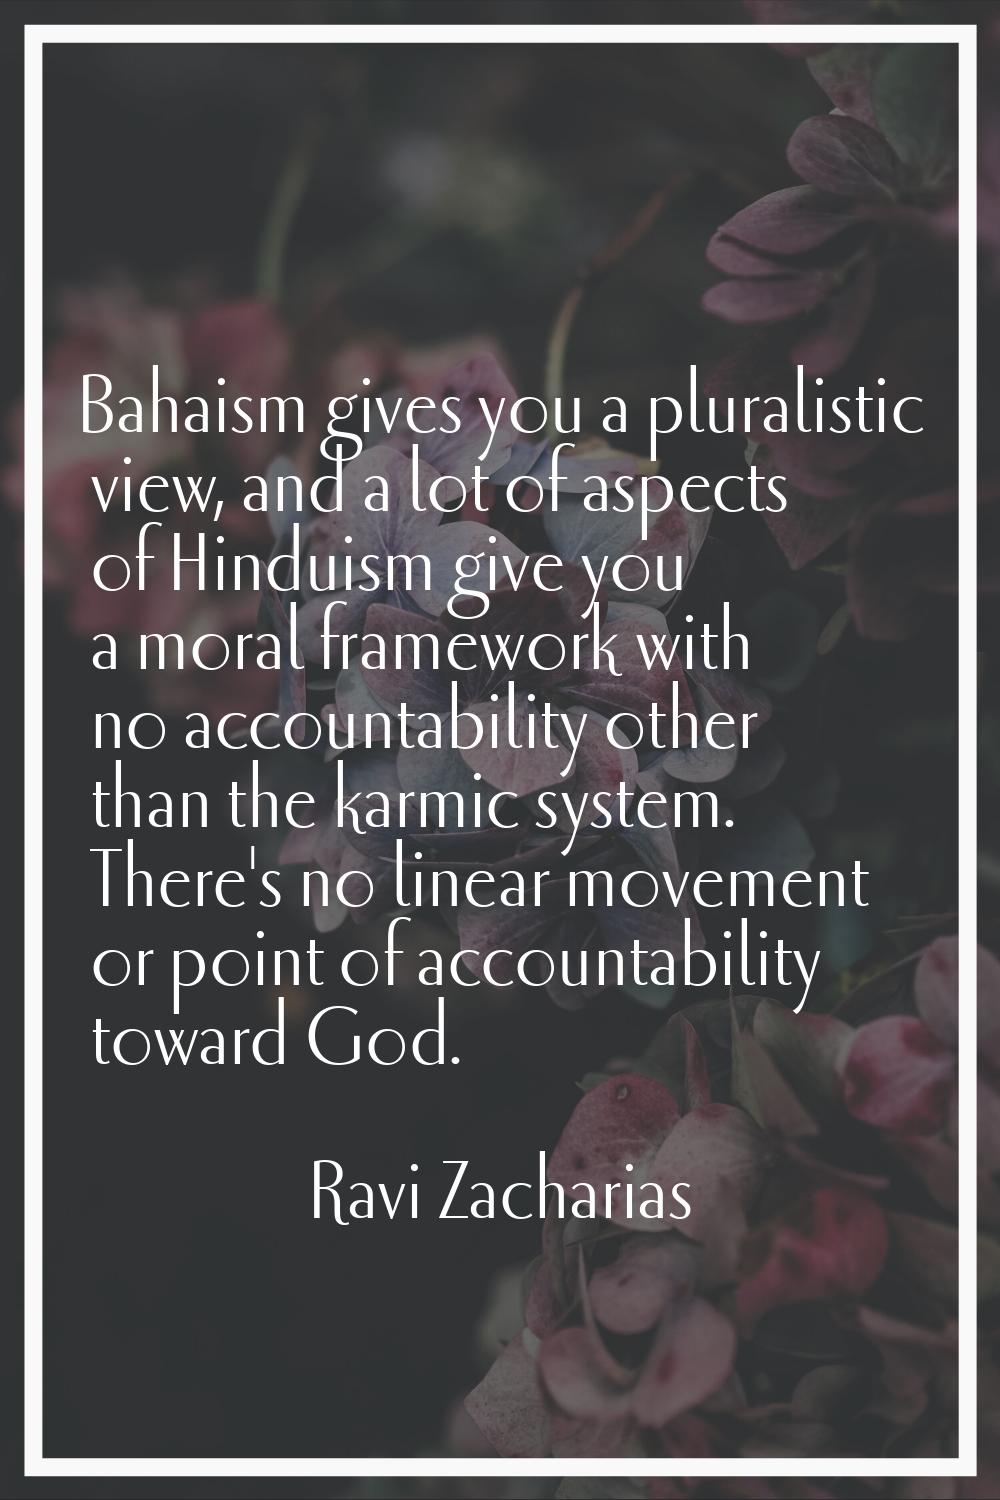 Bahaism gives you a pluralistic view, and a lot of aspects of Hinduism give you a moral framework w